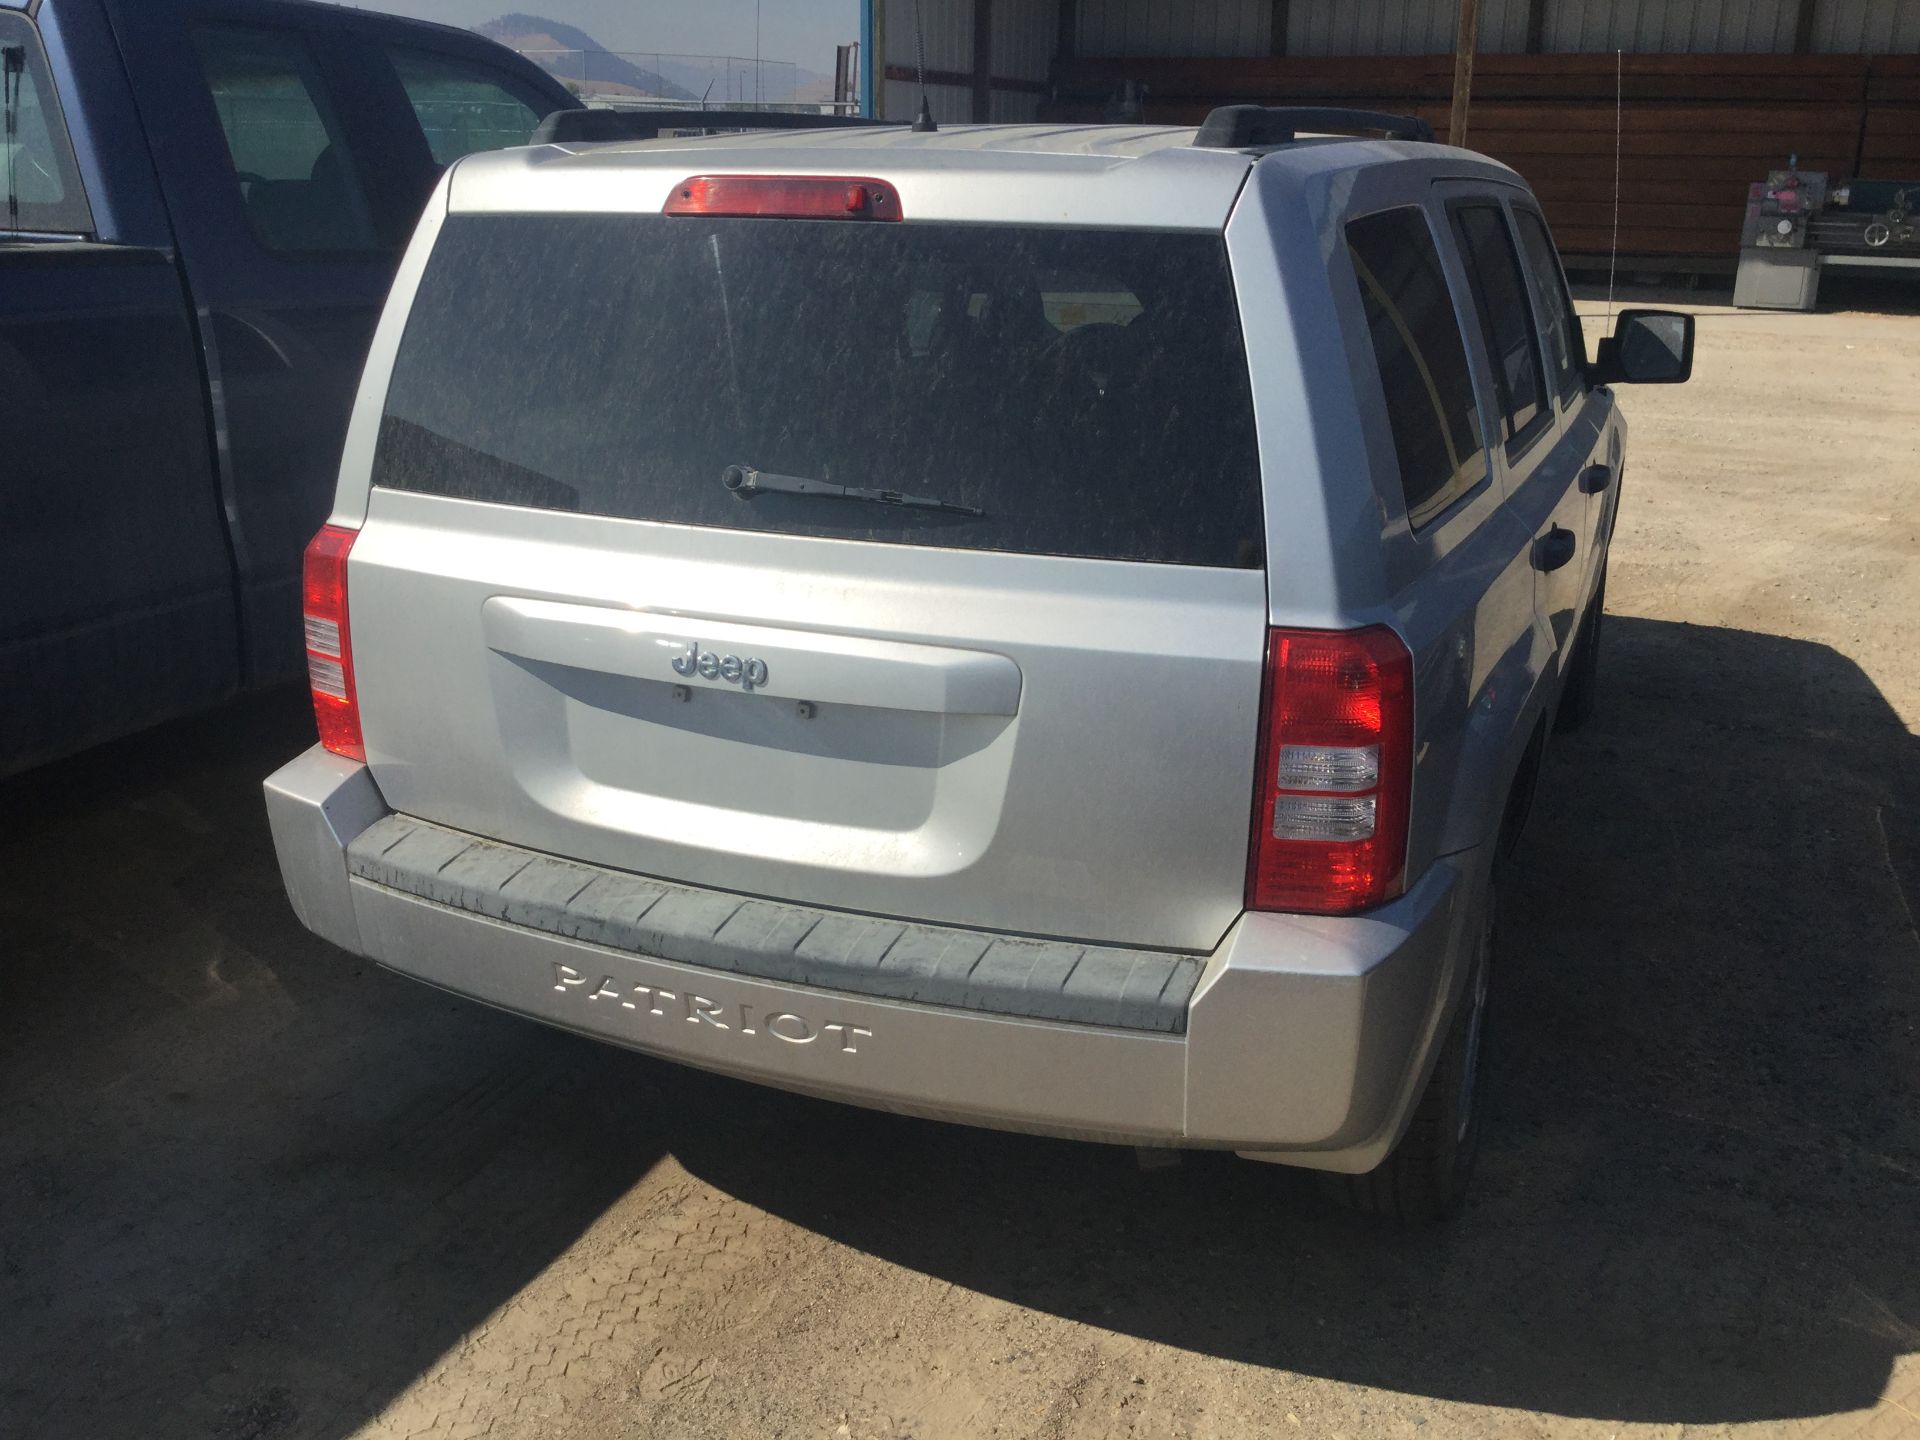 Year: 2008 Make: Jeep Model: Patriot Type: SUV Vin#: 756864 Mileage/Hours: 136696 2.0L, FWD, auto, - Image 4 of 4